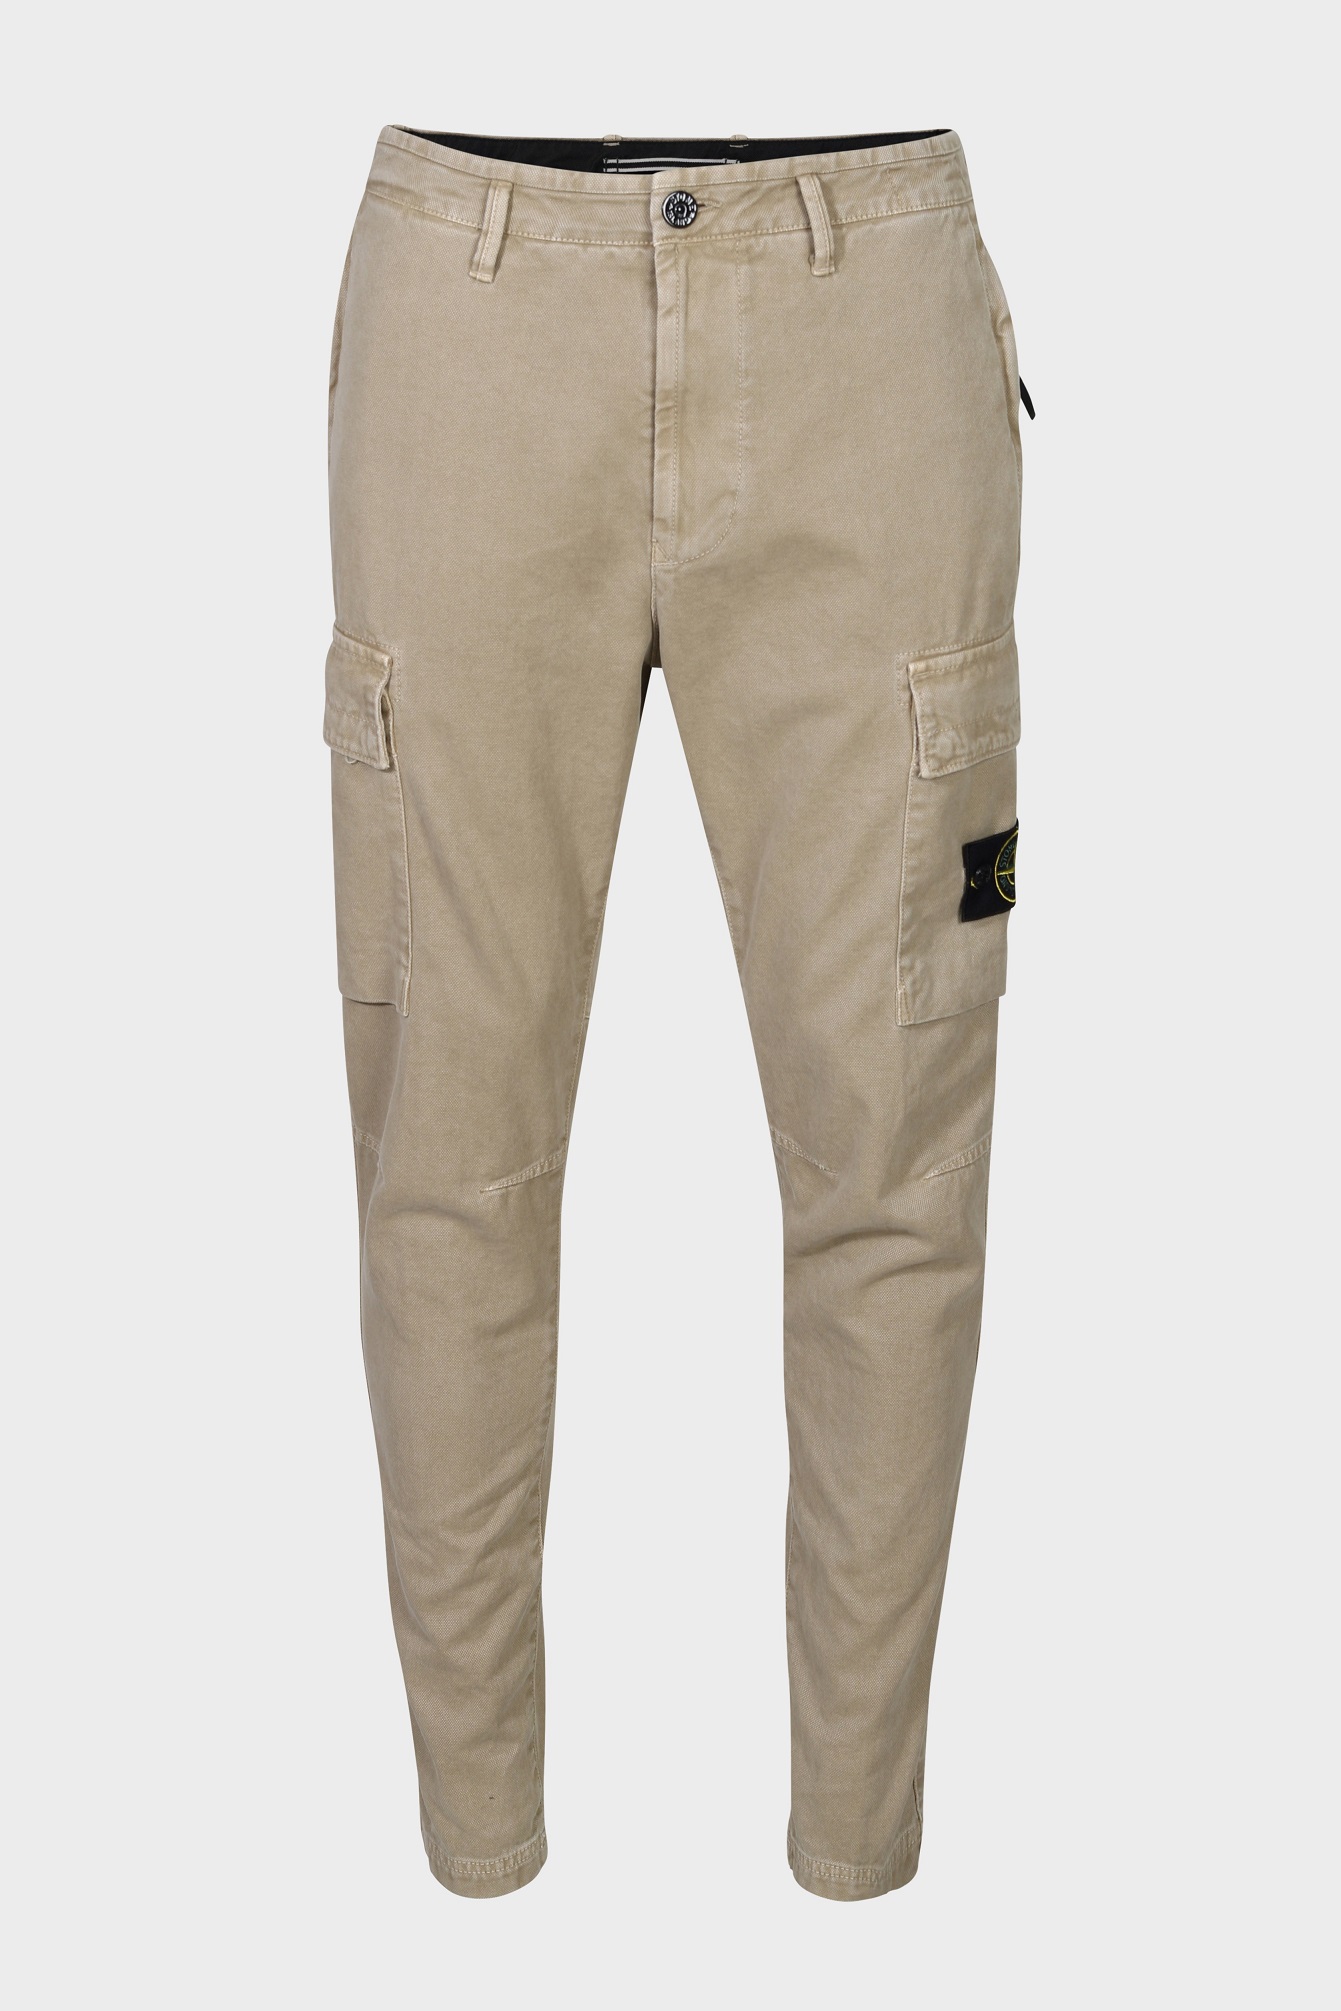 STONE ISLAND Cotton Canvas Cargo Pant in Washed Beige